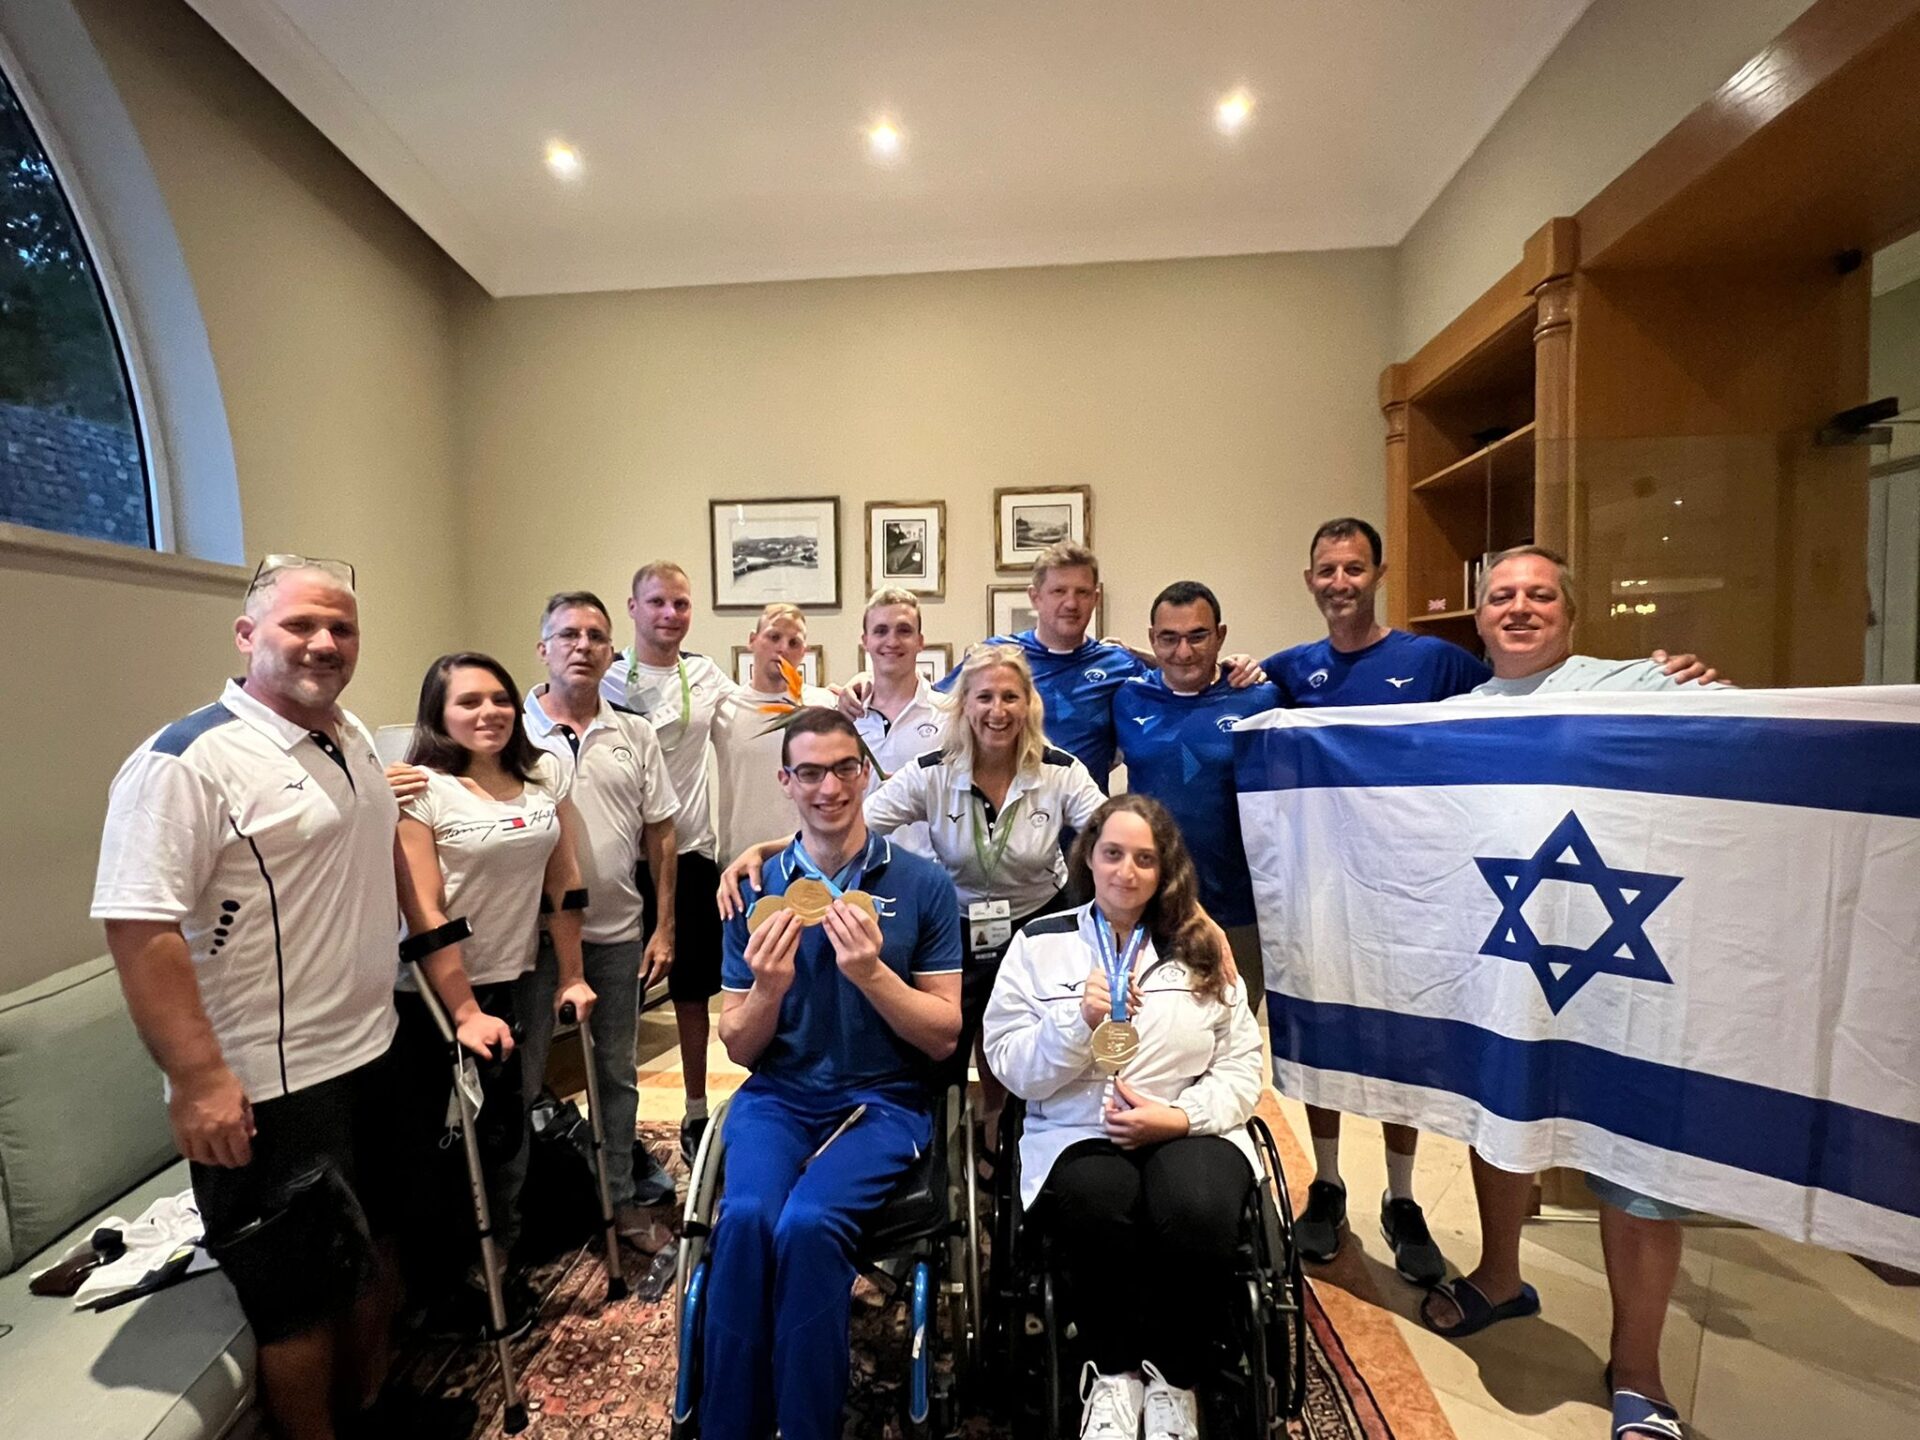 Team Israel comes home with five medals from the 2022 Para Swimming World Championships in Portugal. Photo courtesy of Israel Paralympic Committee